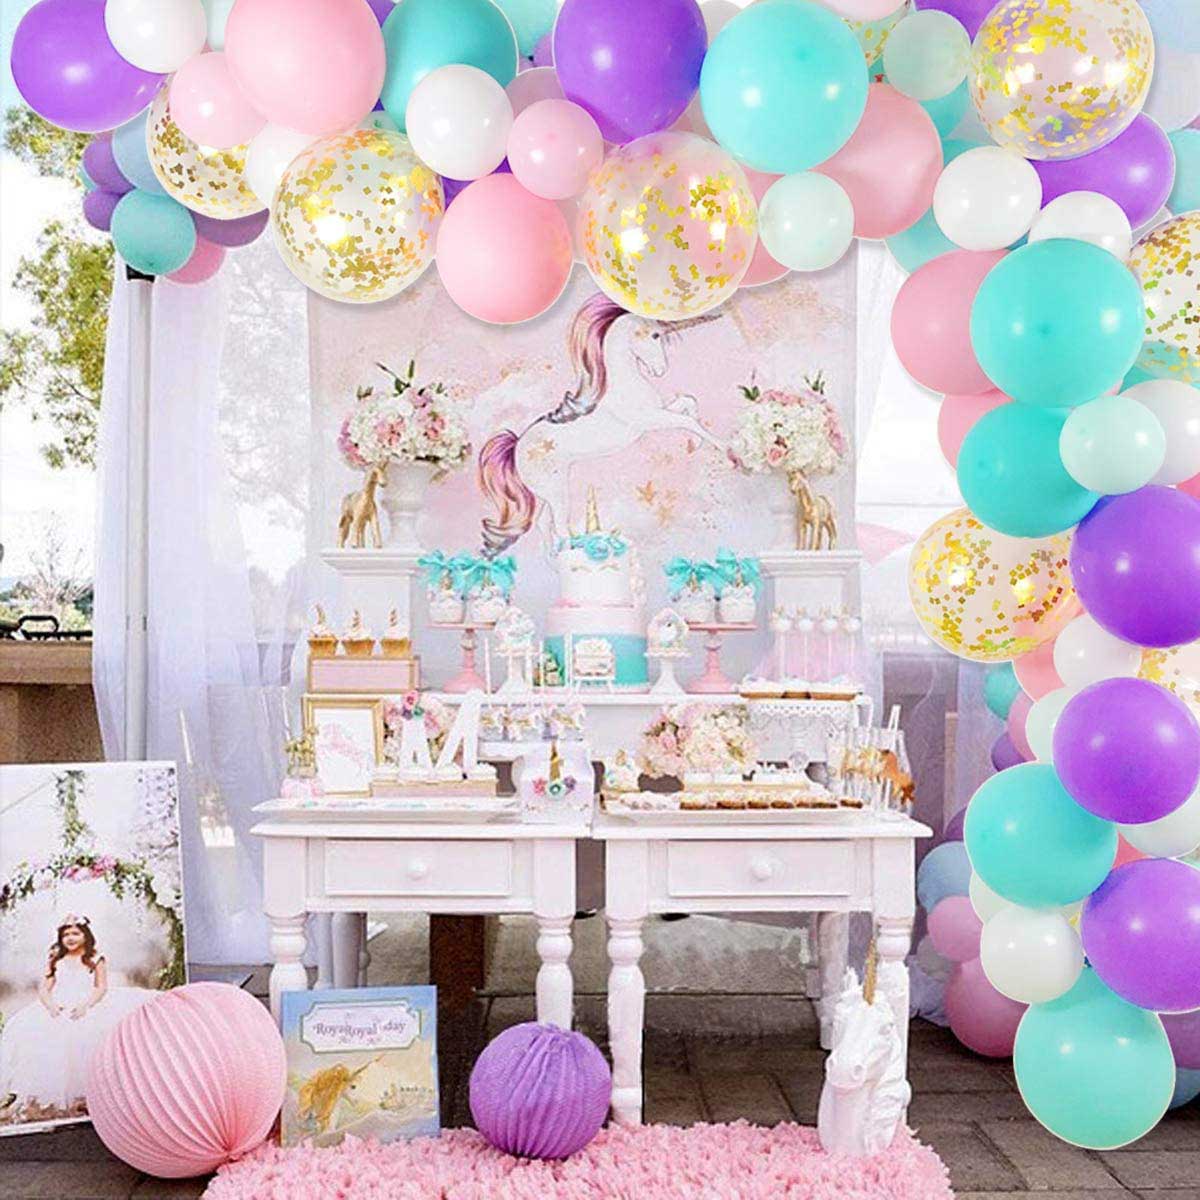 30 Most Magical Unicorn Party Ideas - Play Party Plan